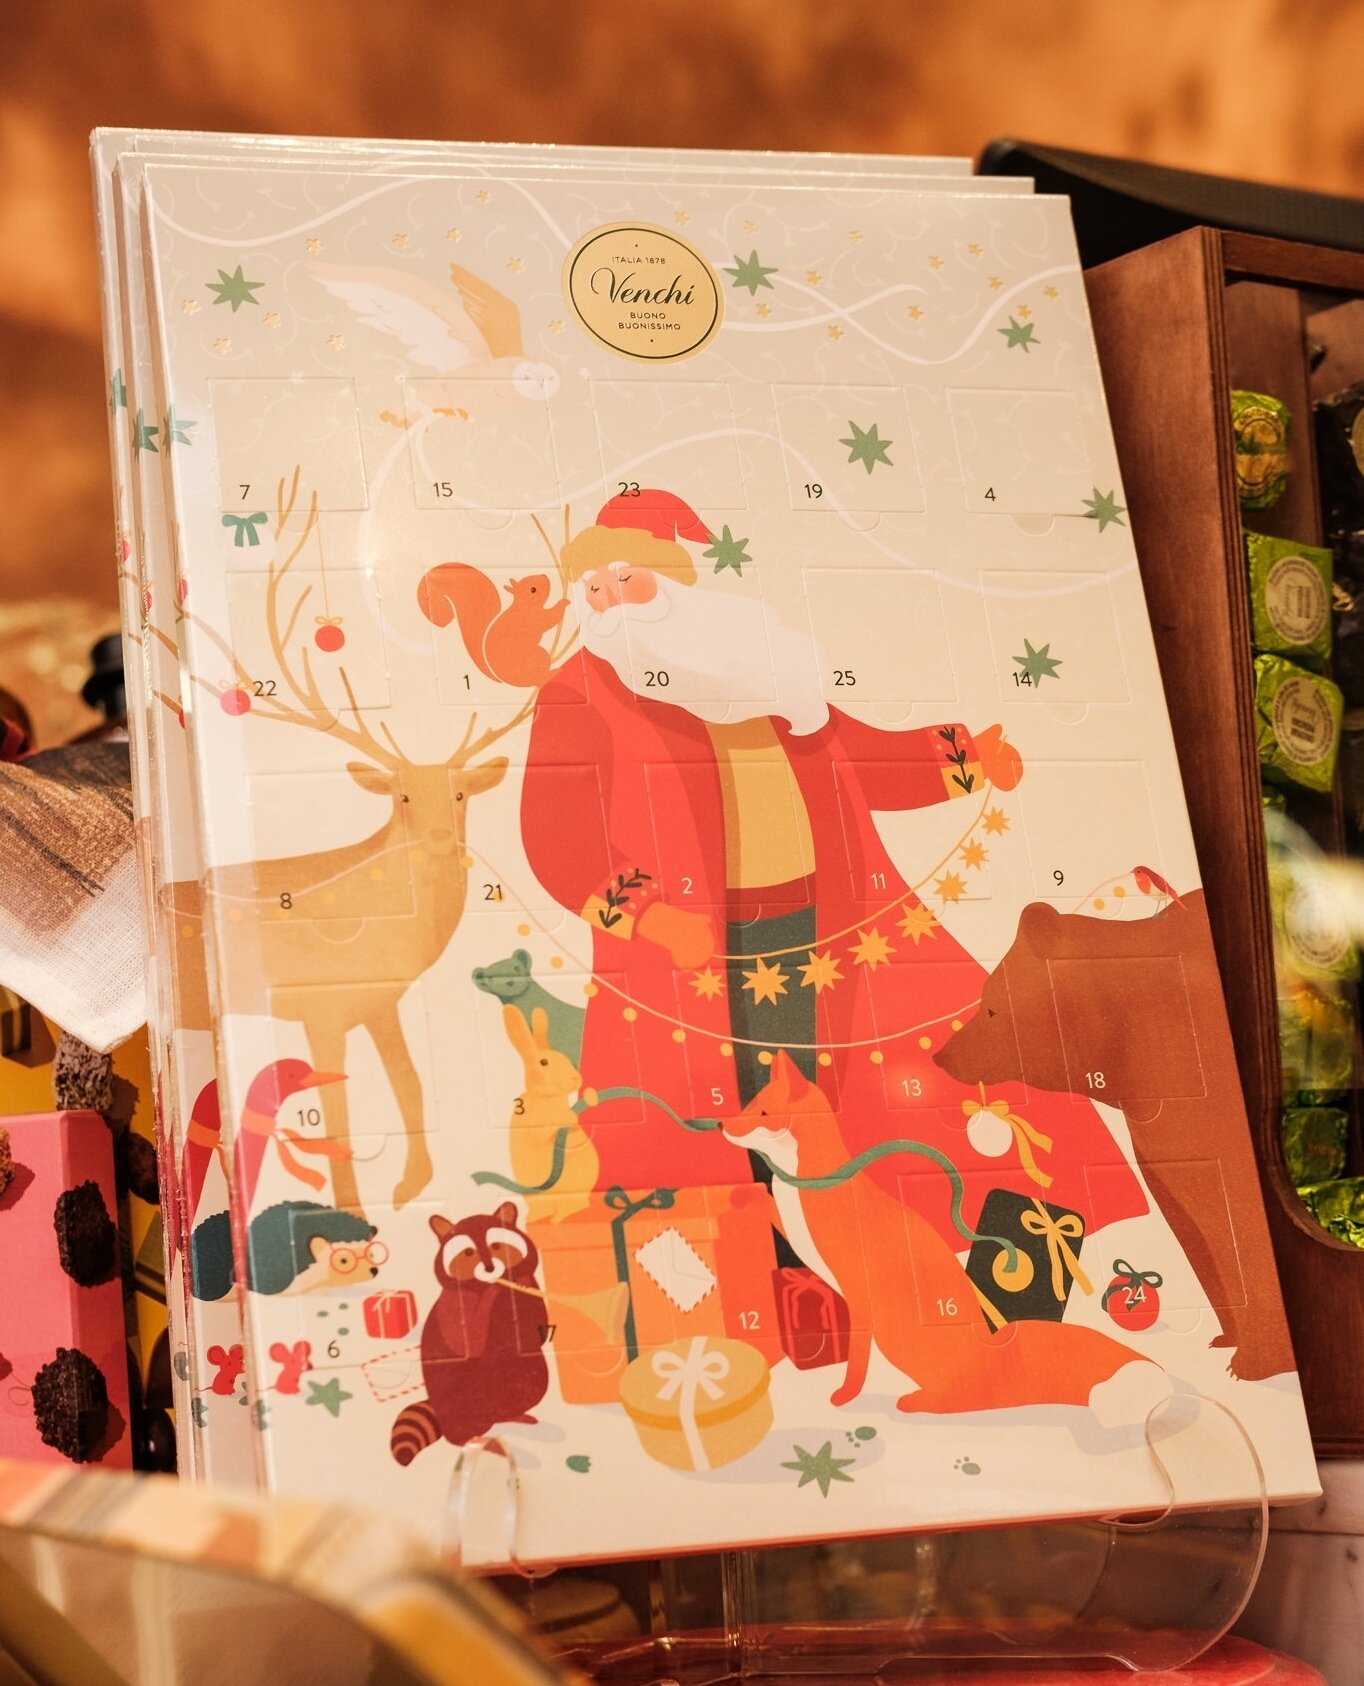 Oh, the excitement! Children will adore this fairytale advent calendar. Beautifully illustrated and filled with chocolate treats for each day of the Christmas countdown.

#adventcalendar #christmascountdown #chocolateadventcalendar #venchiadventcal